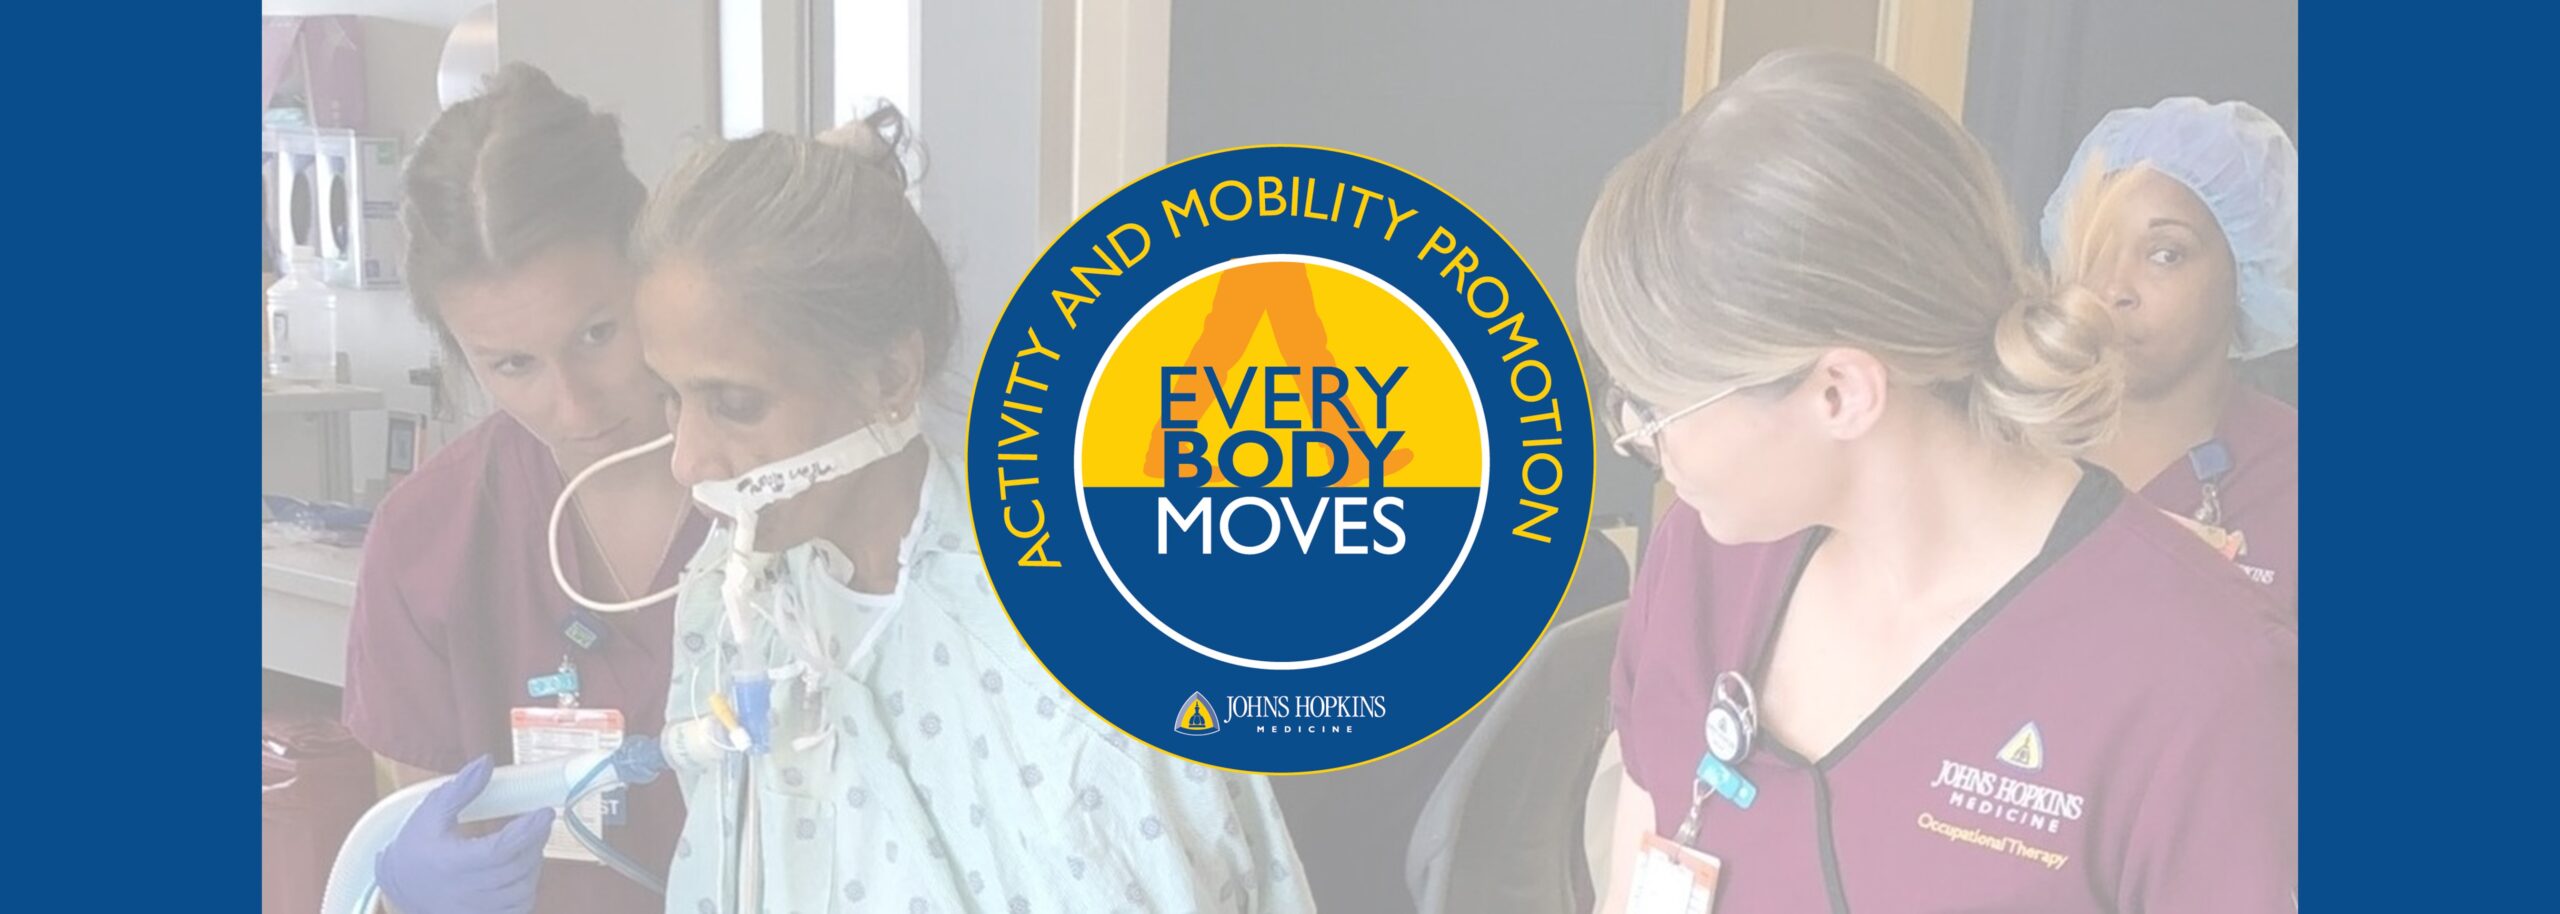 Johns Hopkins Activity and Mobility Promotion Solutions